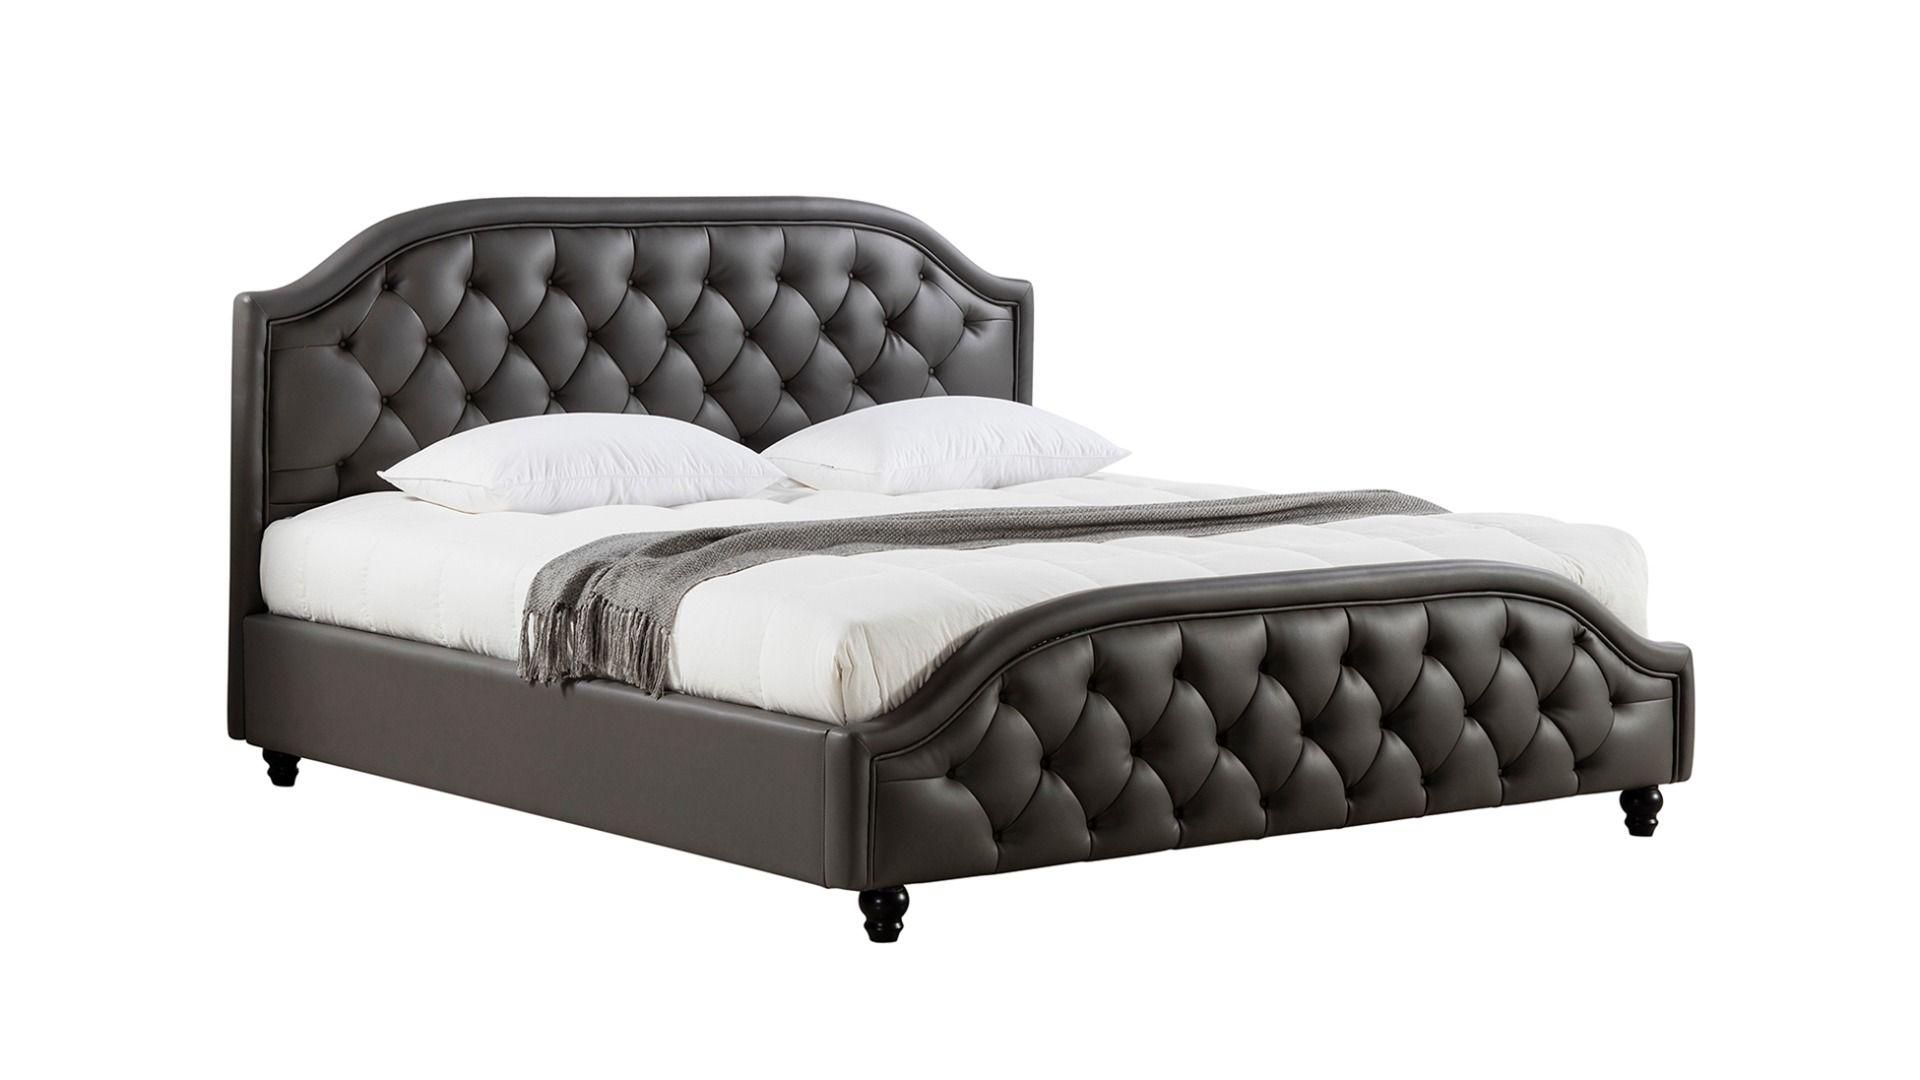 Contemporary Platform Bed B-D058 AE B-D058-Q in Dark Gray Leather Air Fabric